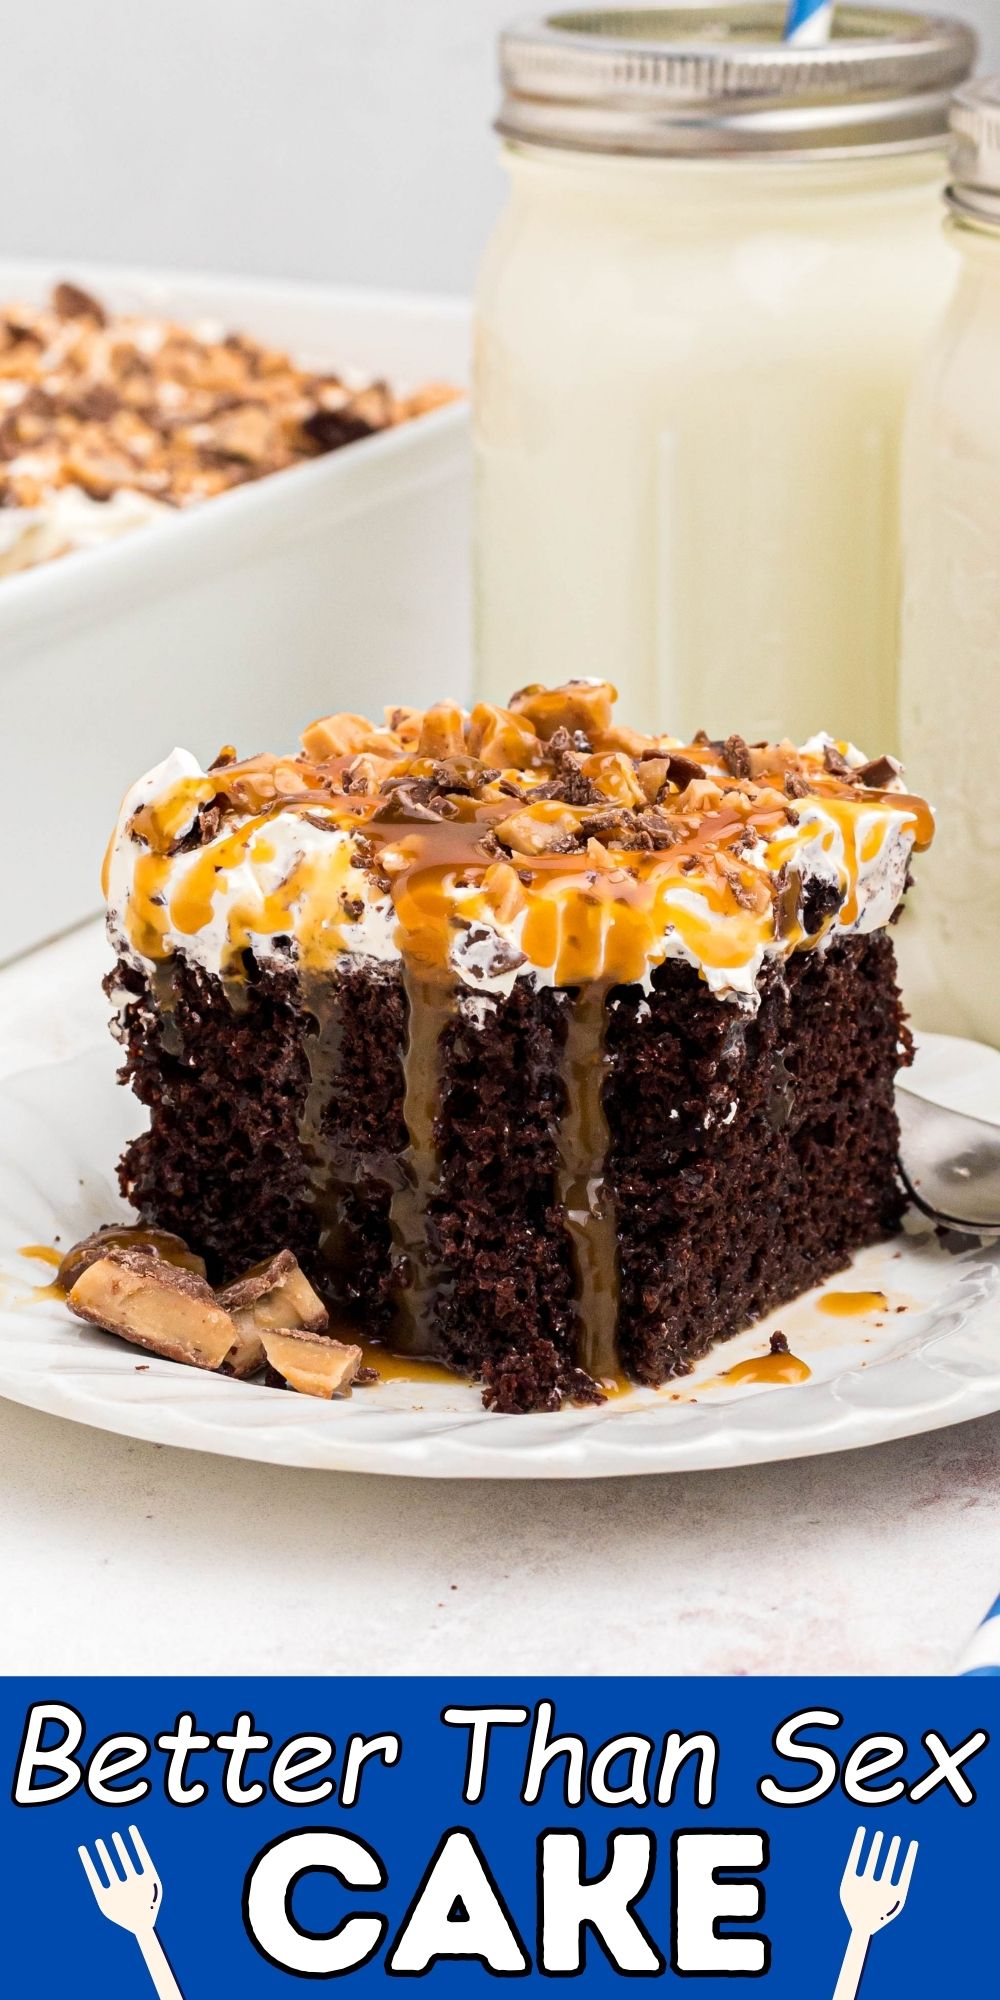 This Better Than Sex Cake Recipe is cake, caramel sauce, whipped topping, and candy, making a combination that is sinfully delicious!